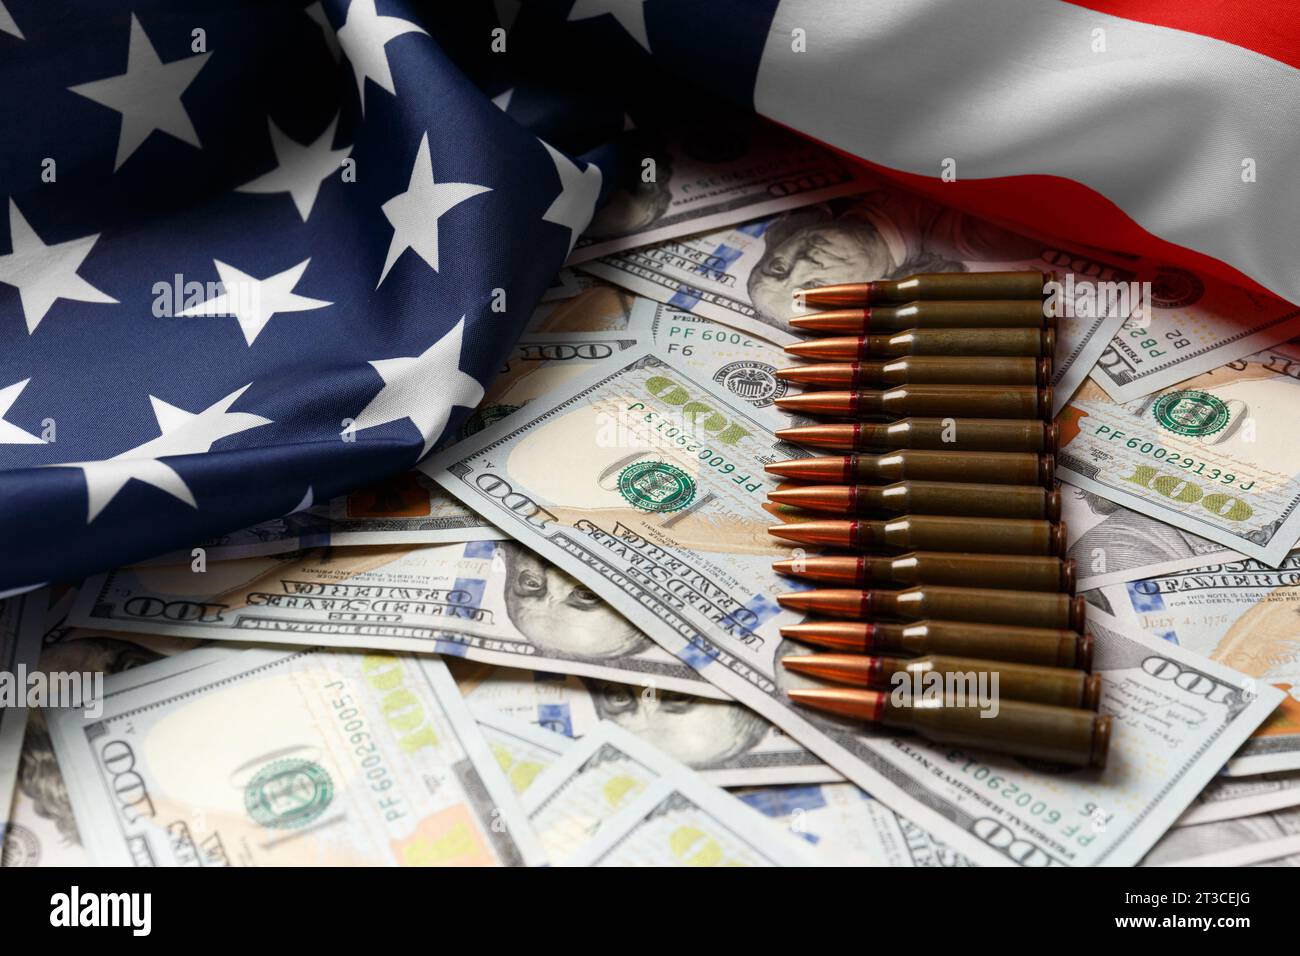 American flag, dollars, bullets, shells, cartridges, ammunition. The concept of lend-lease, army, arms sales. Military industry, war, world arms trade Stock Photo